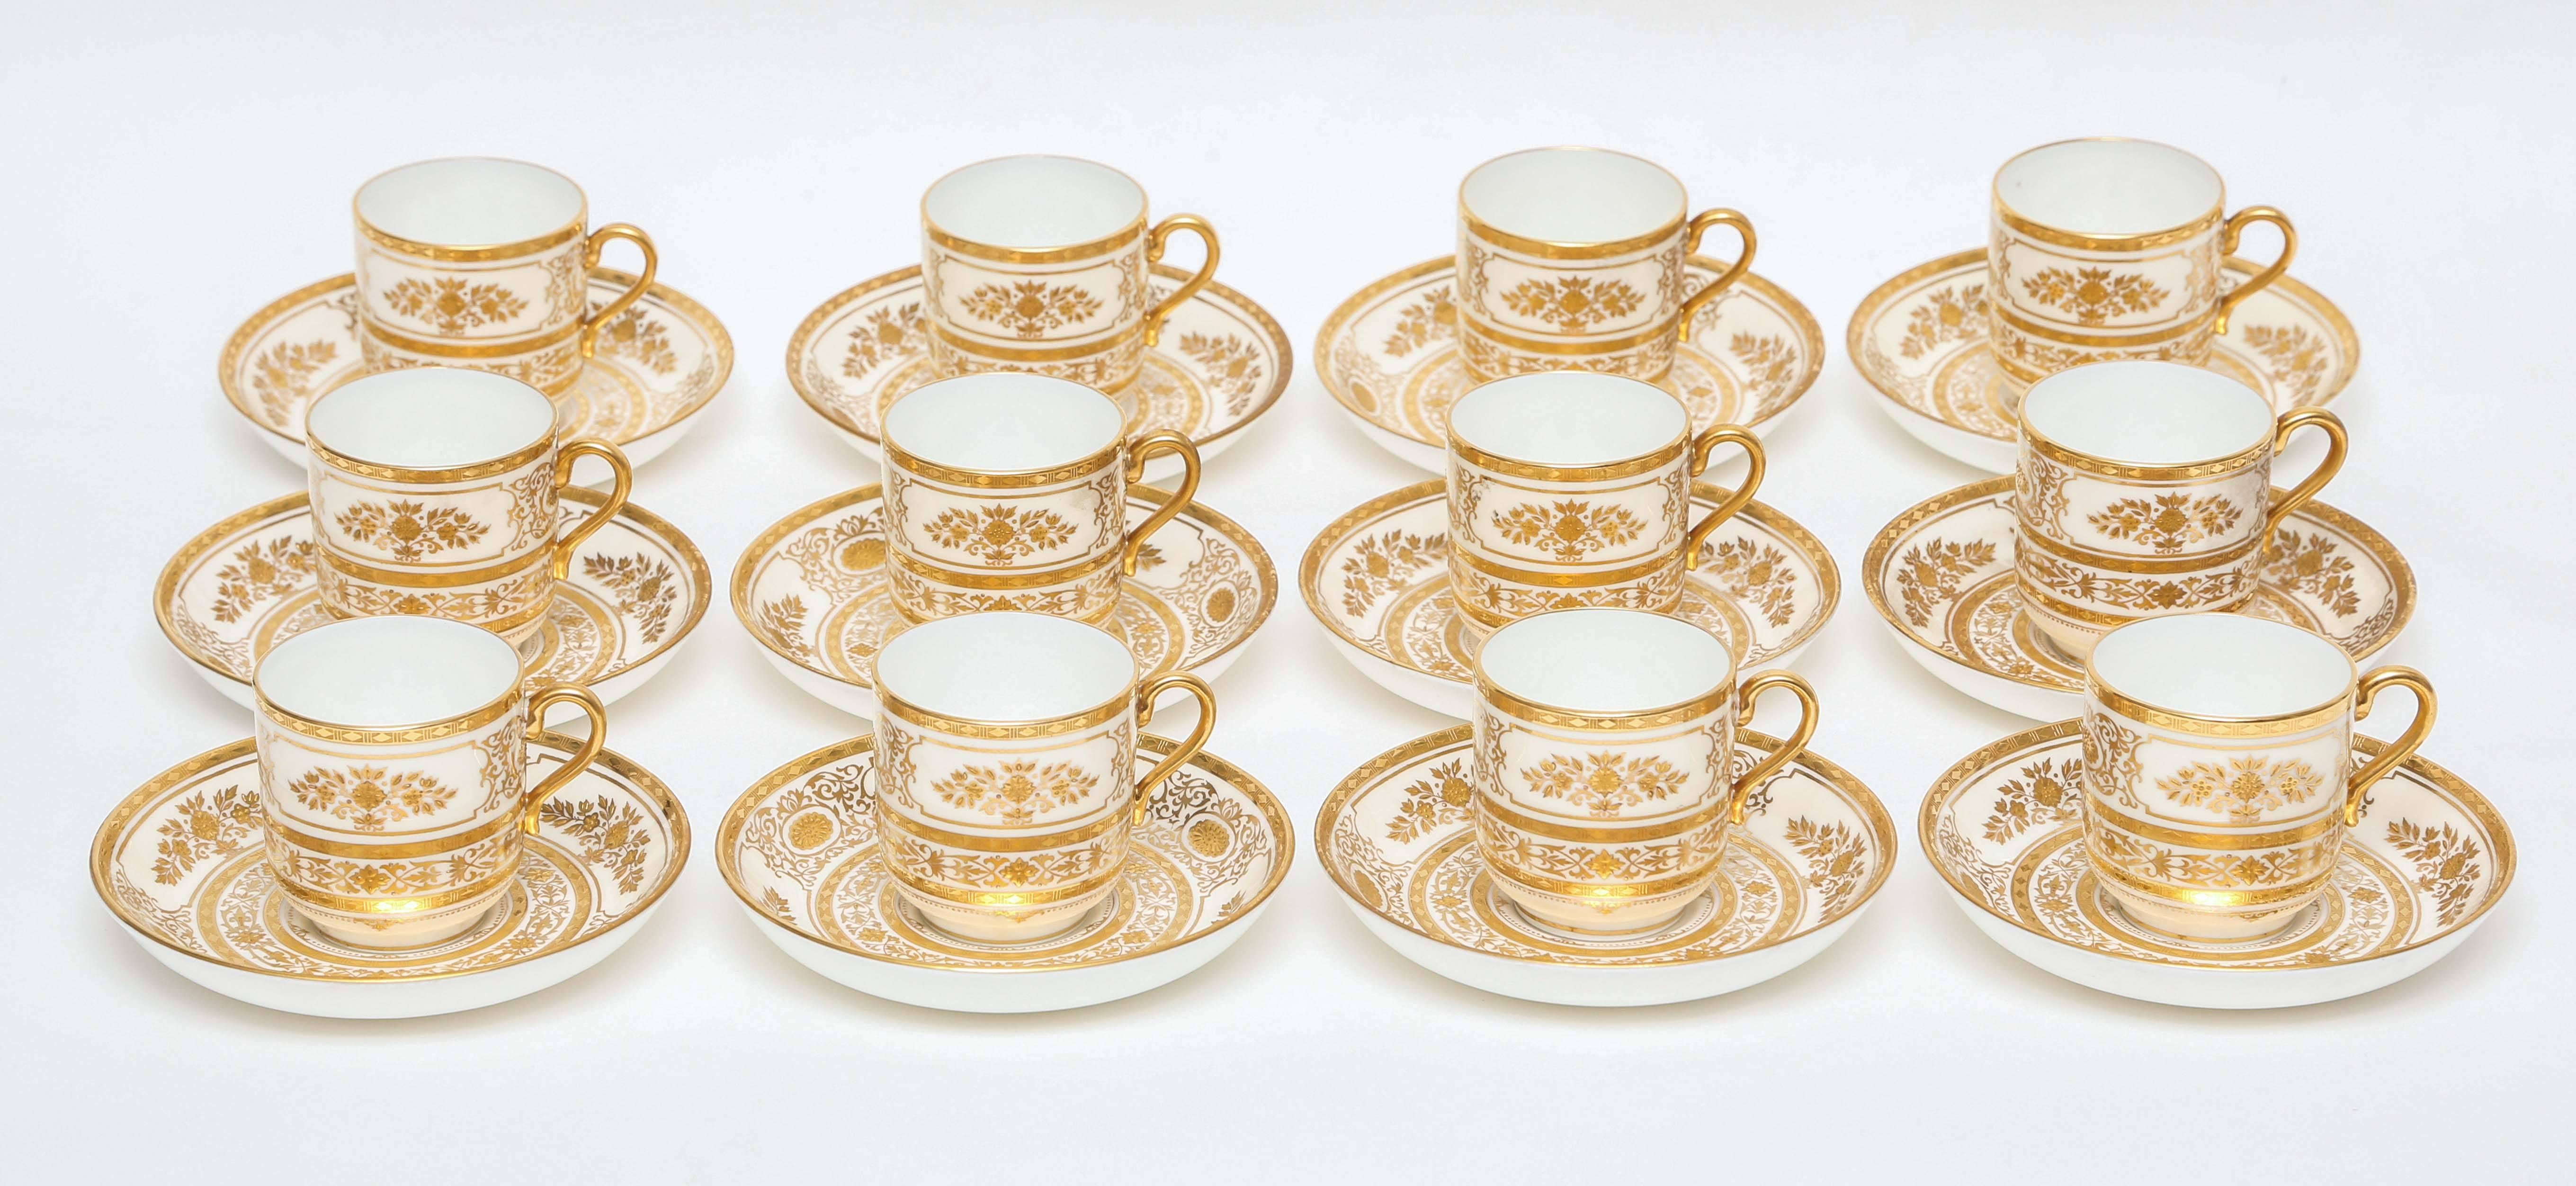 A gorgeous cup and saucer set for your table featuring a raised gilt pattern from Minton, England and custom ordered through the fine retailer of Tiffany & Co New York. Triple etched gilt bands surround a tooled gilt foliate design. The perfect